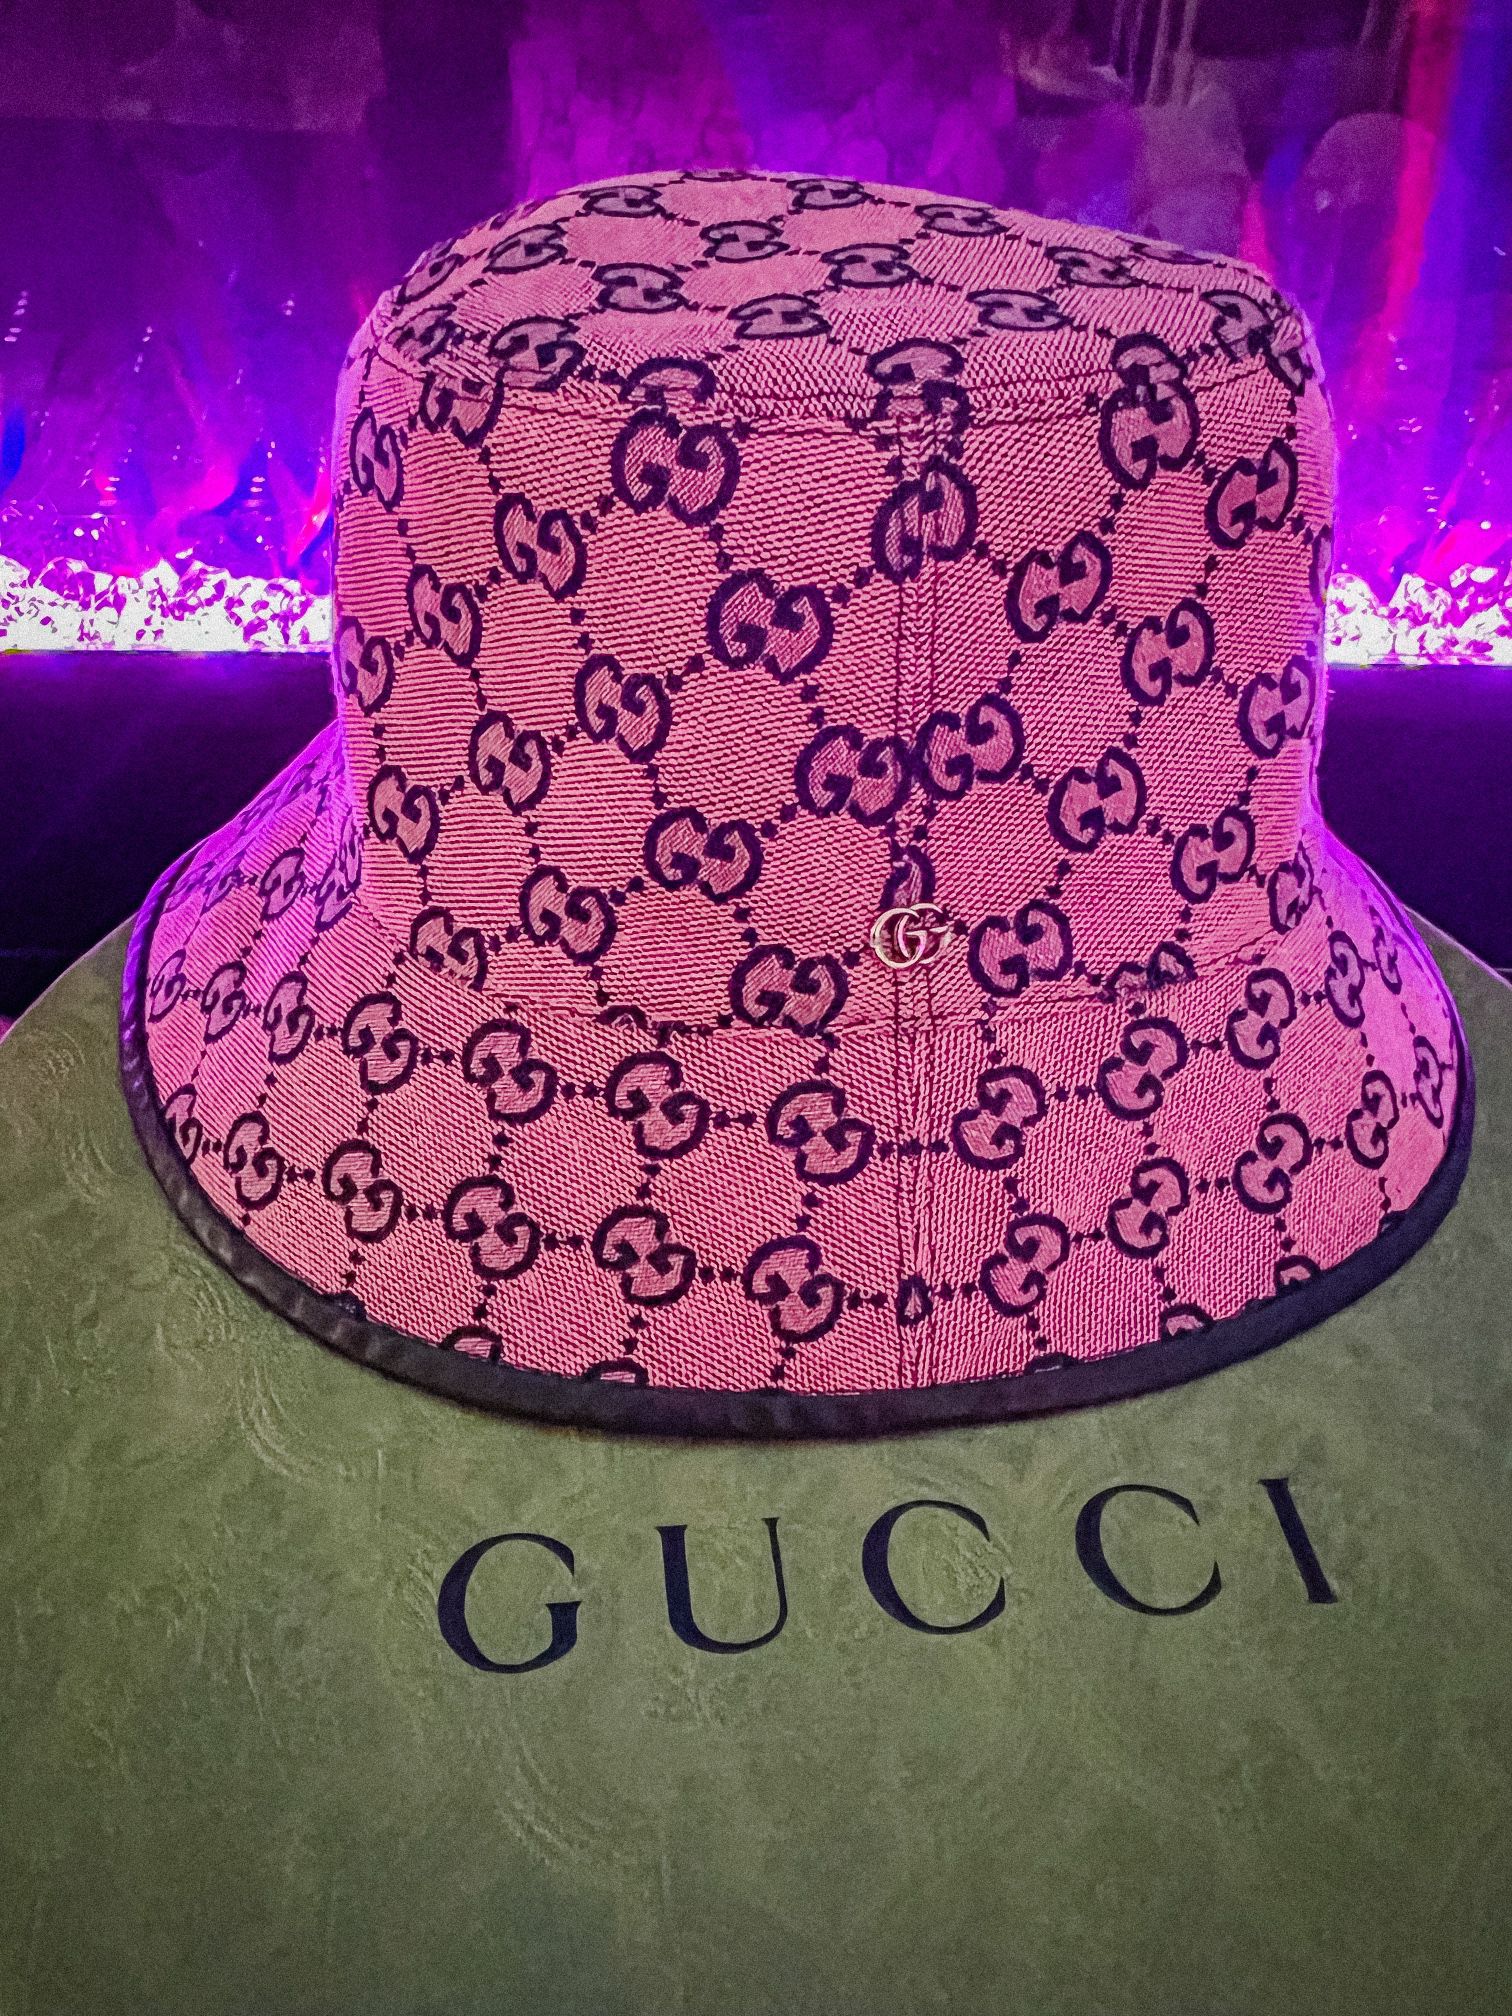 Gucci Marmont Pink Bucket Hat Size Large